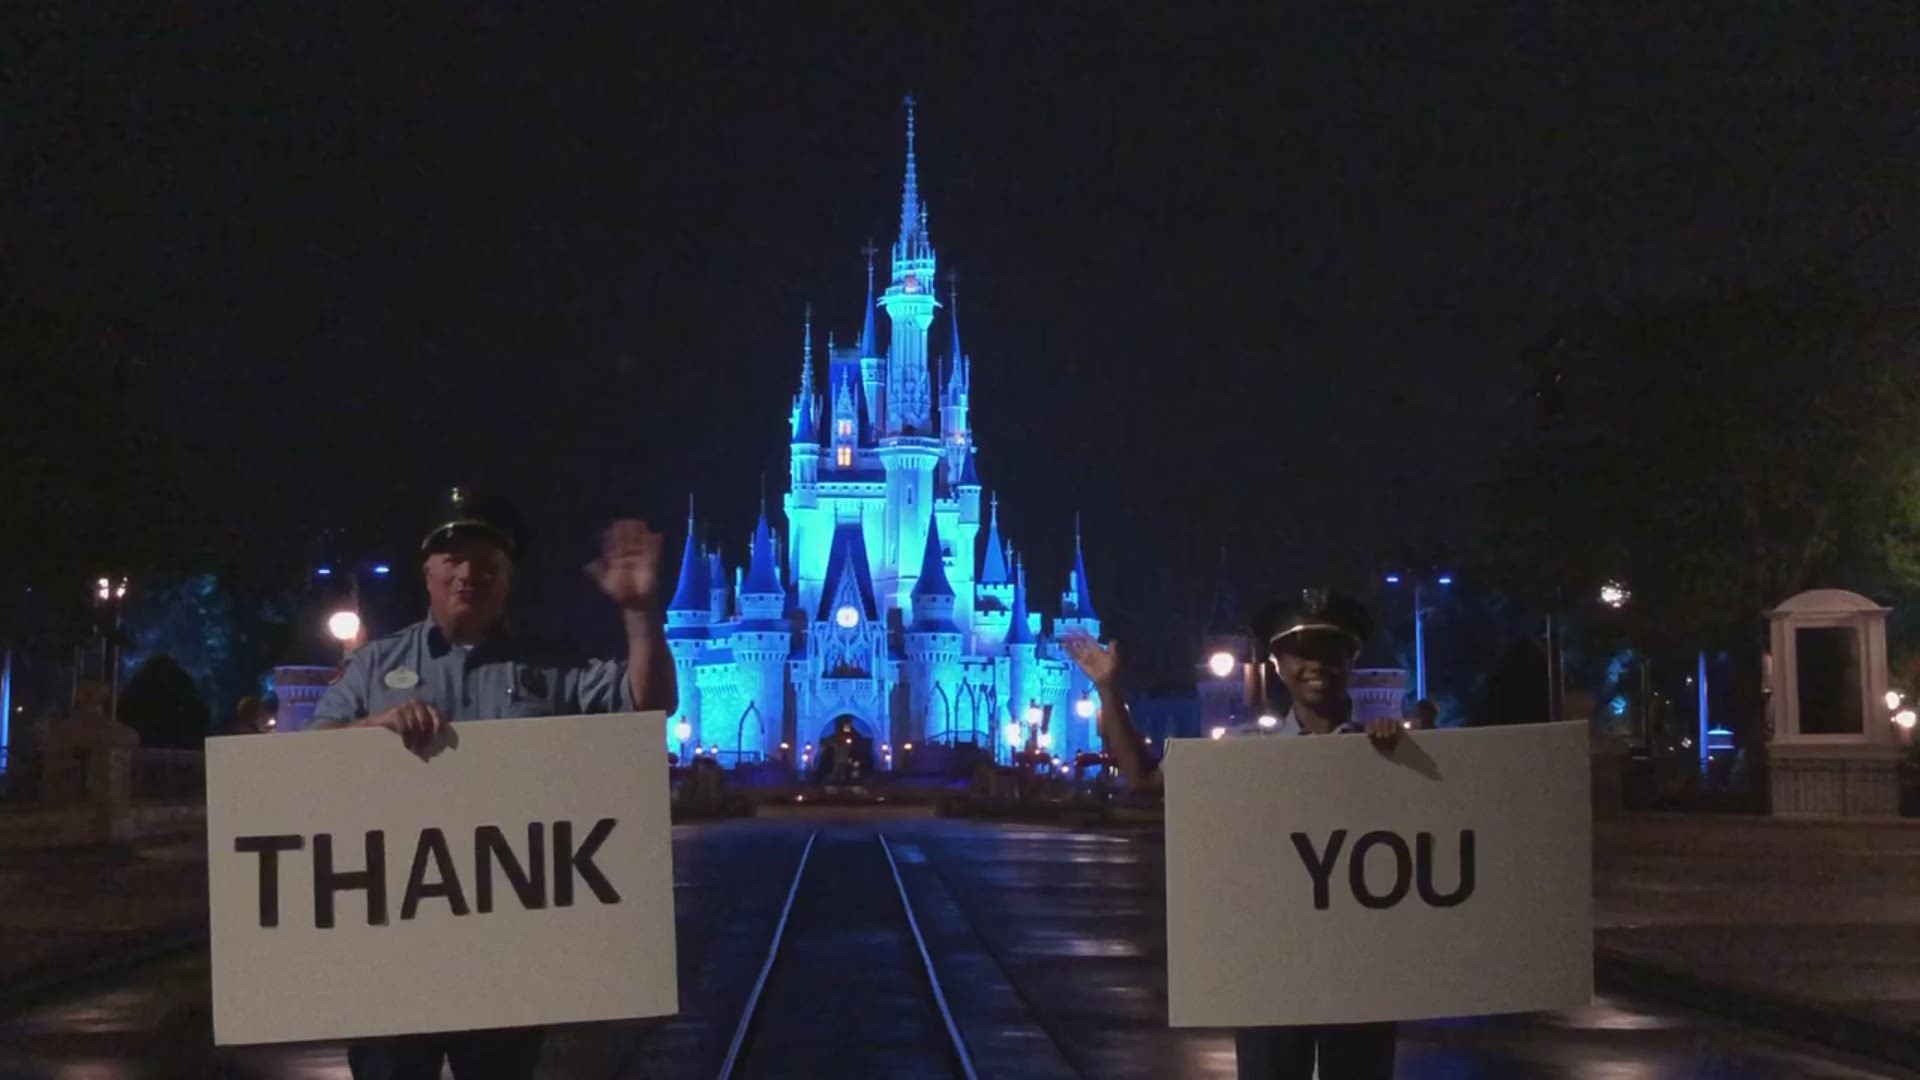 Workers at Disney's Magic Kingdom say Thank you to our health care workers on World Health Day.